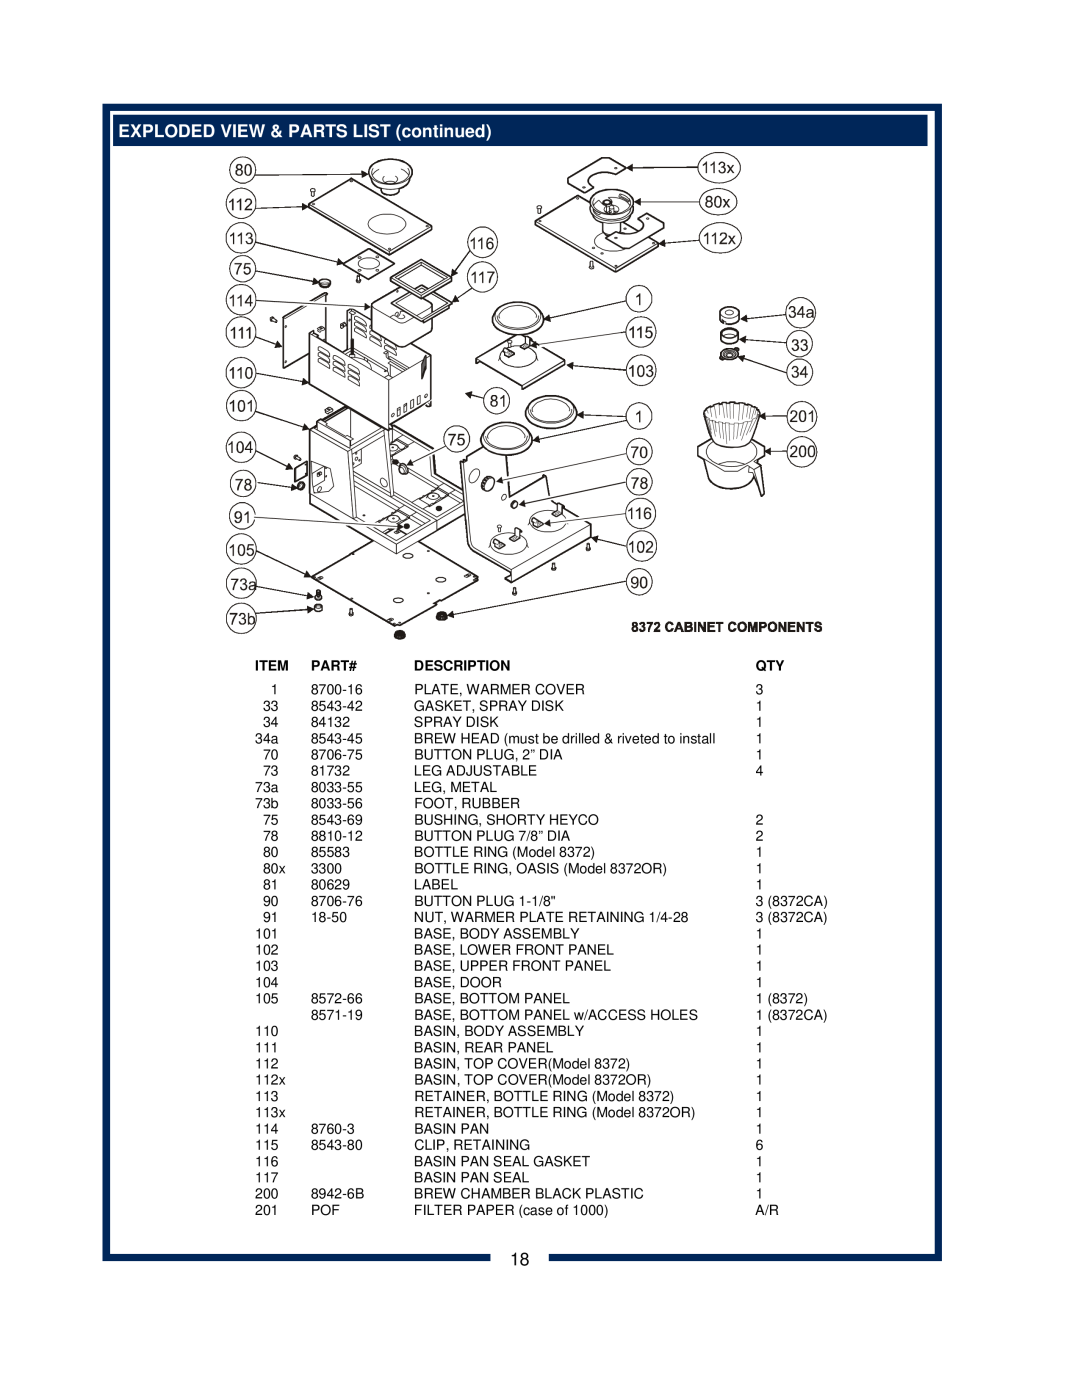 Bloomfield 8372 owner manual EXPLODED VIEW & PARTS LIST continued, Part#, Description 